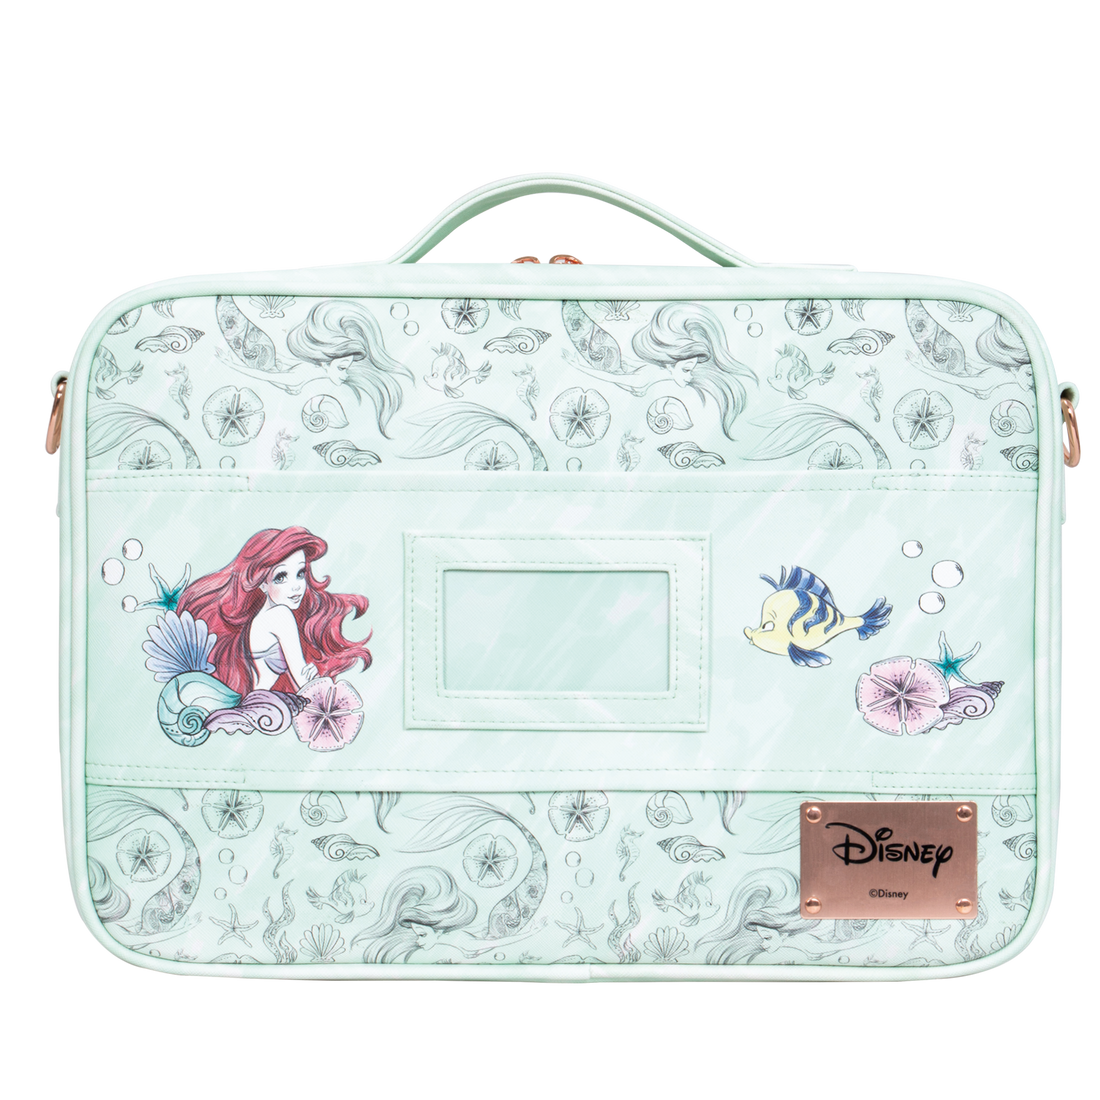 Ariel Makeup Carry Case with Adjustable Dividers